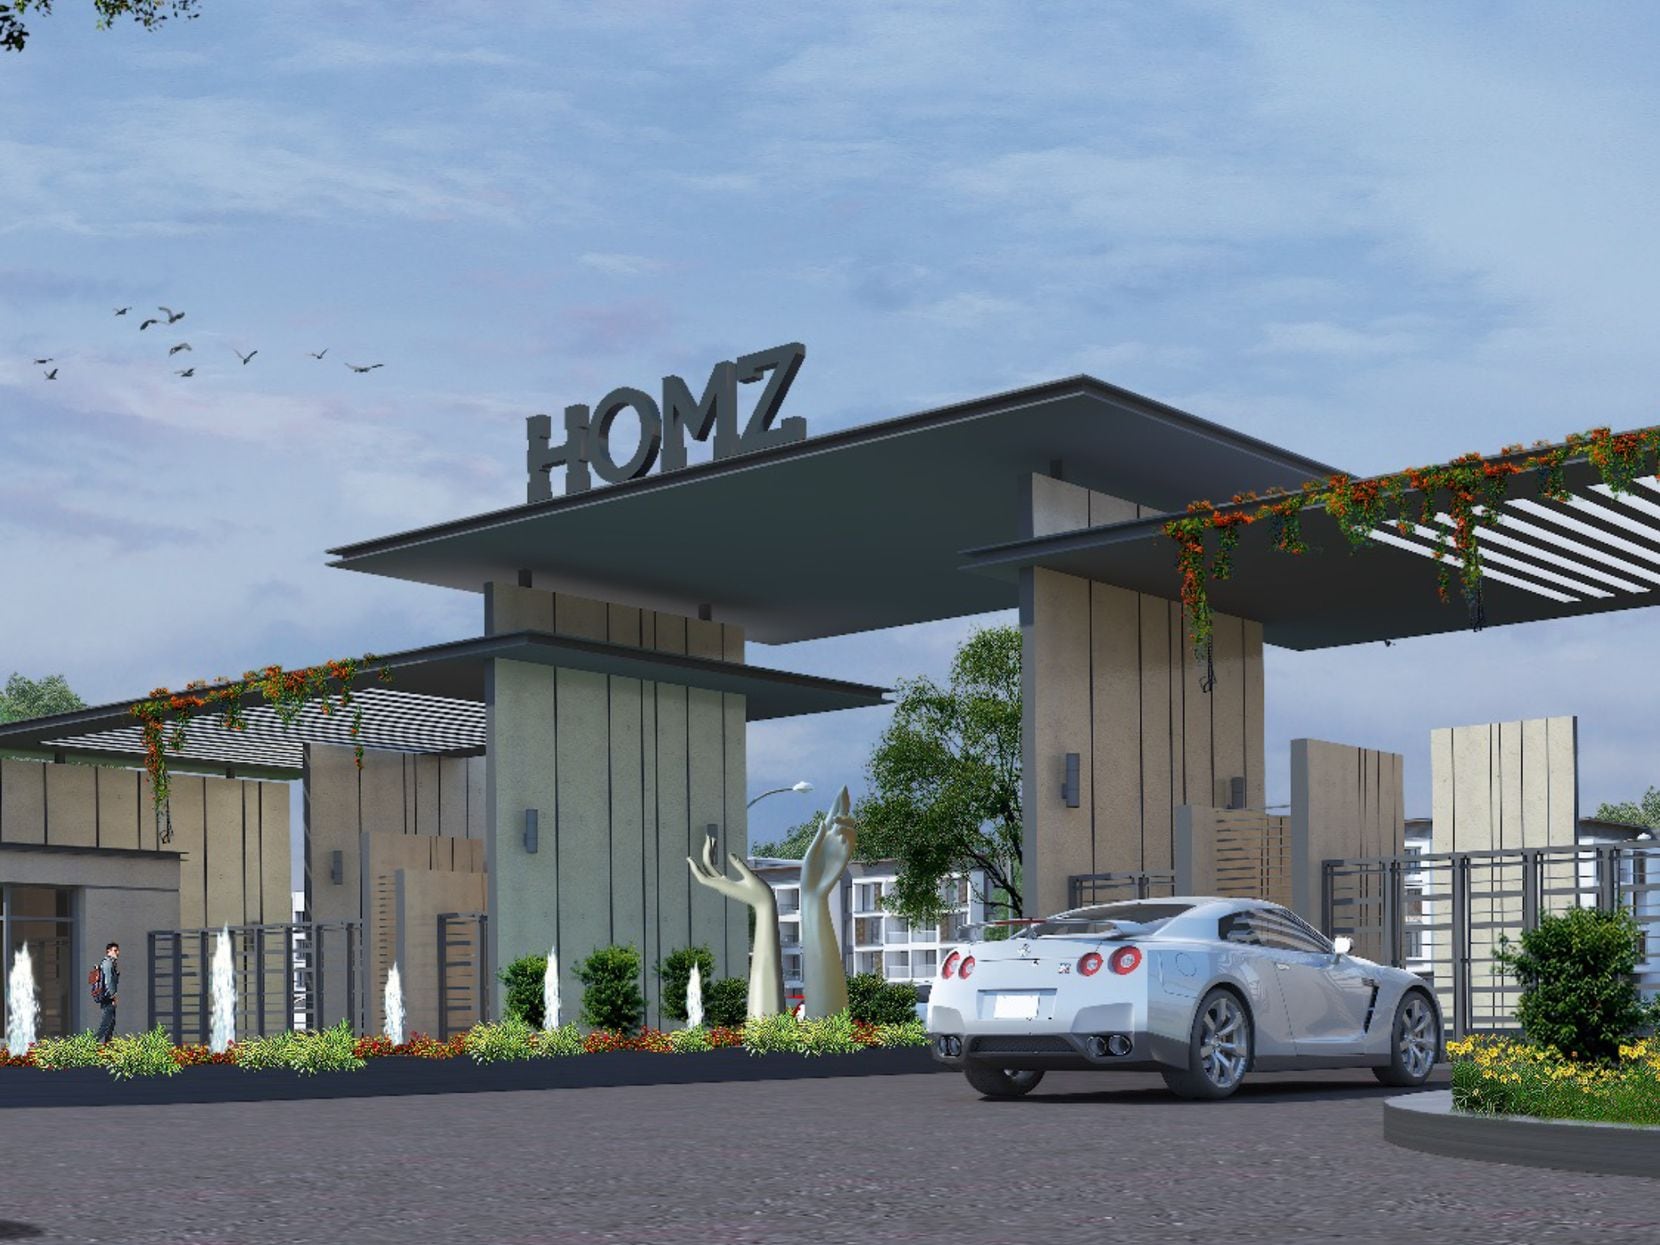 An artist's rendering of an entrance to a Homz community.